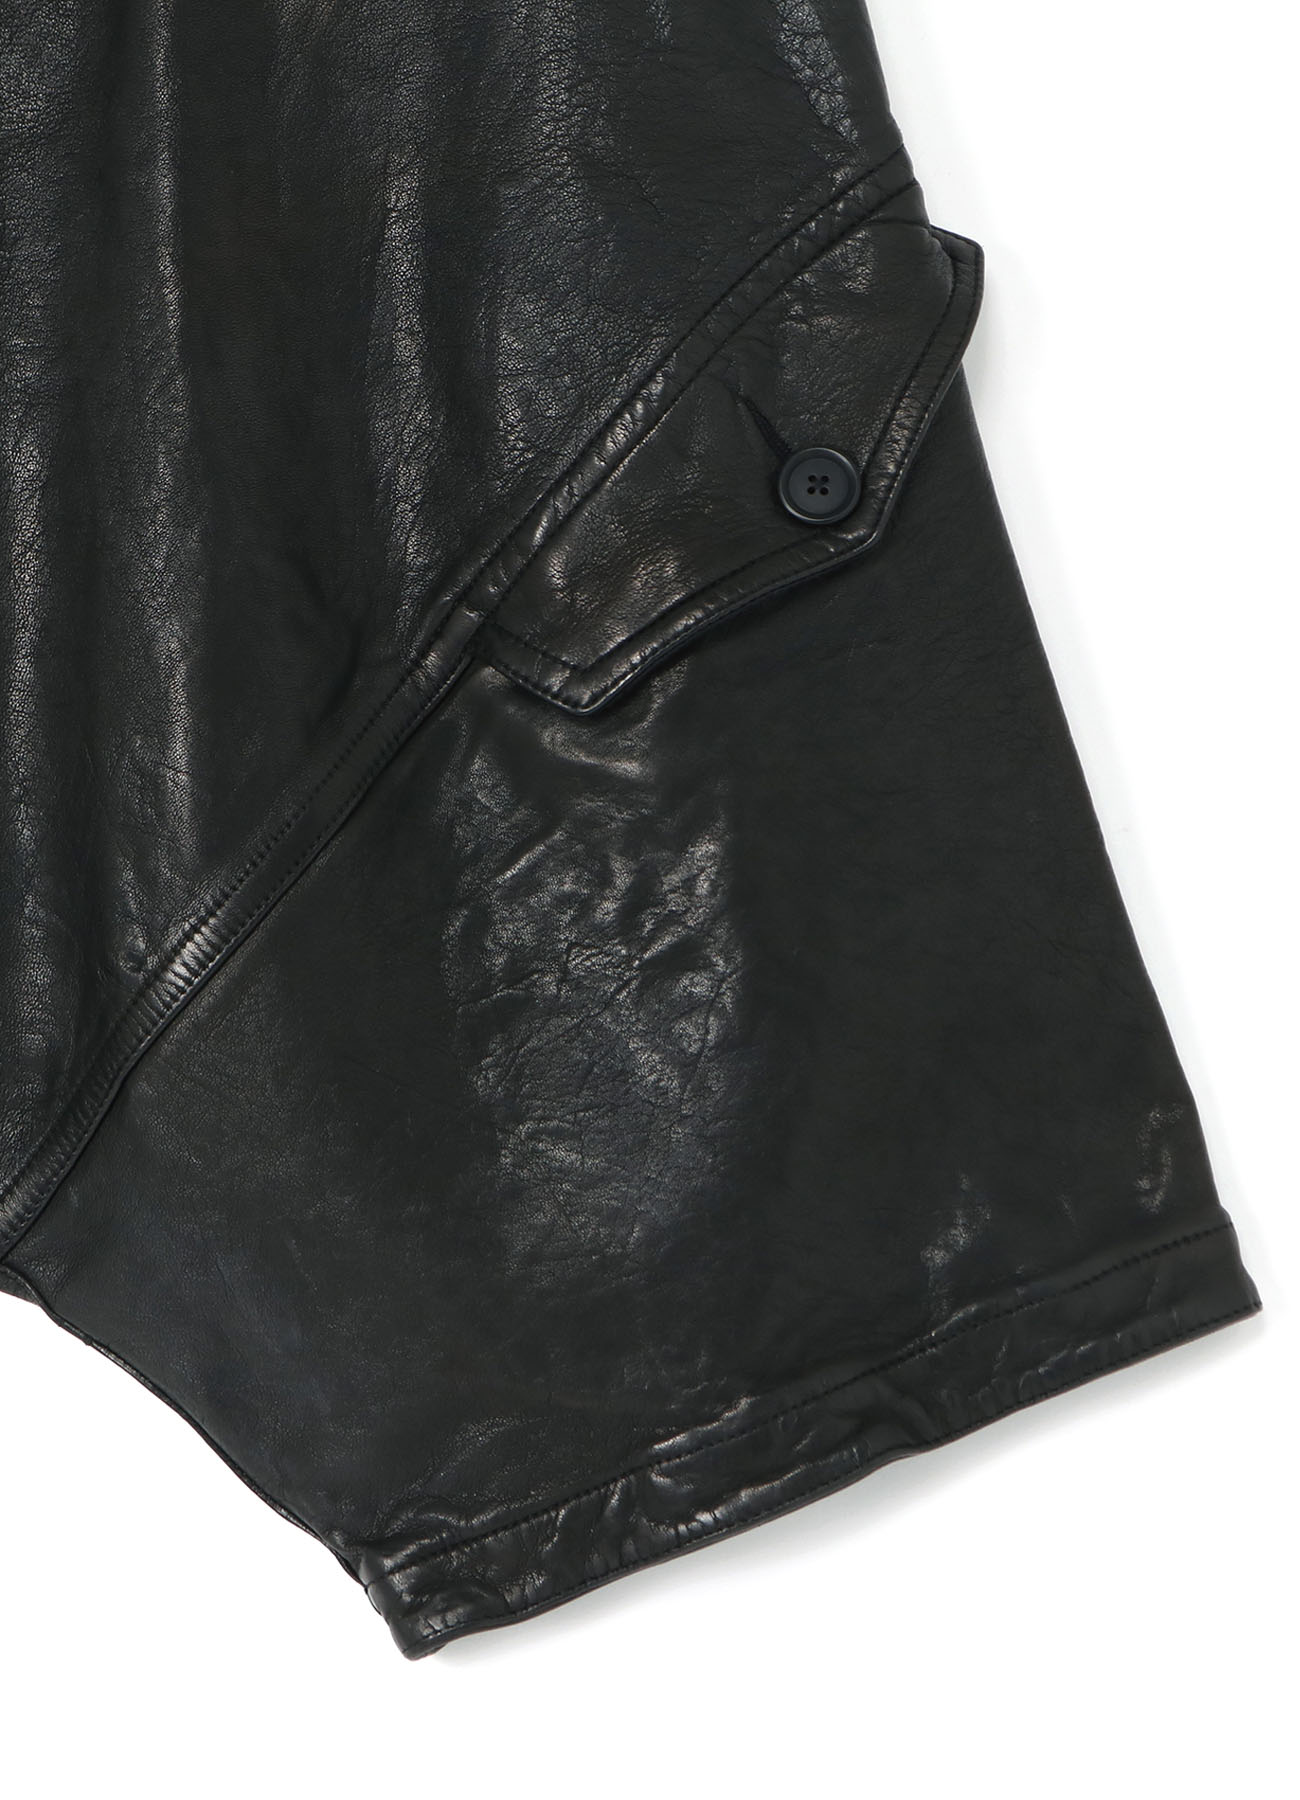 Vegetable Tanned and Washed Sheep Leather  Switching Seam Pocket 6-quarter-length Saruel Pants